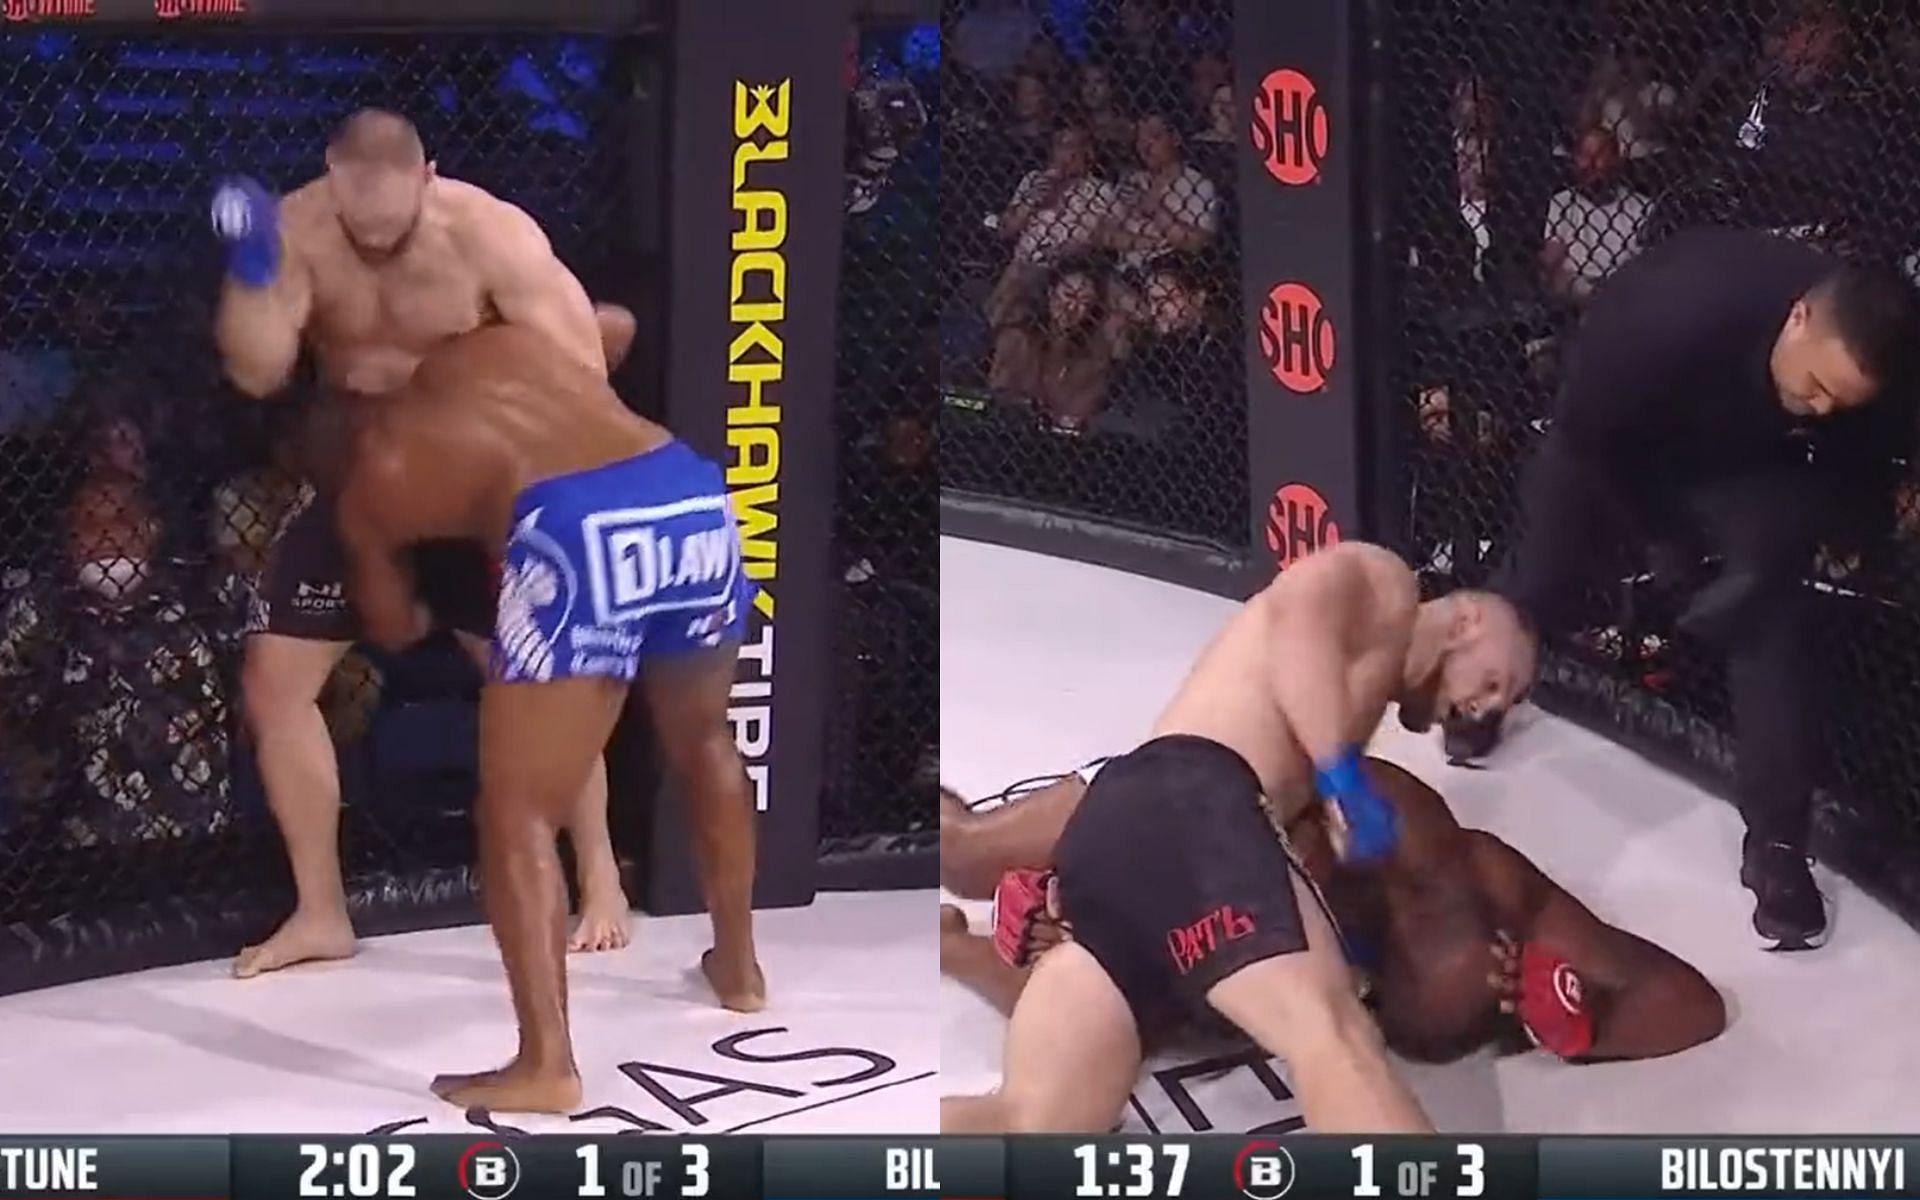 Screenshots of the finishing seqence at Bellator 294 last night between Fortune and Bilostenniy [Images courtesy: @CSTodayNews on Twitter]